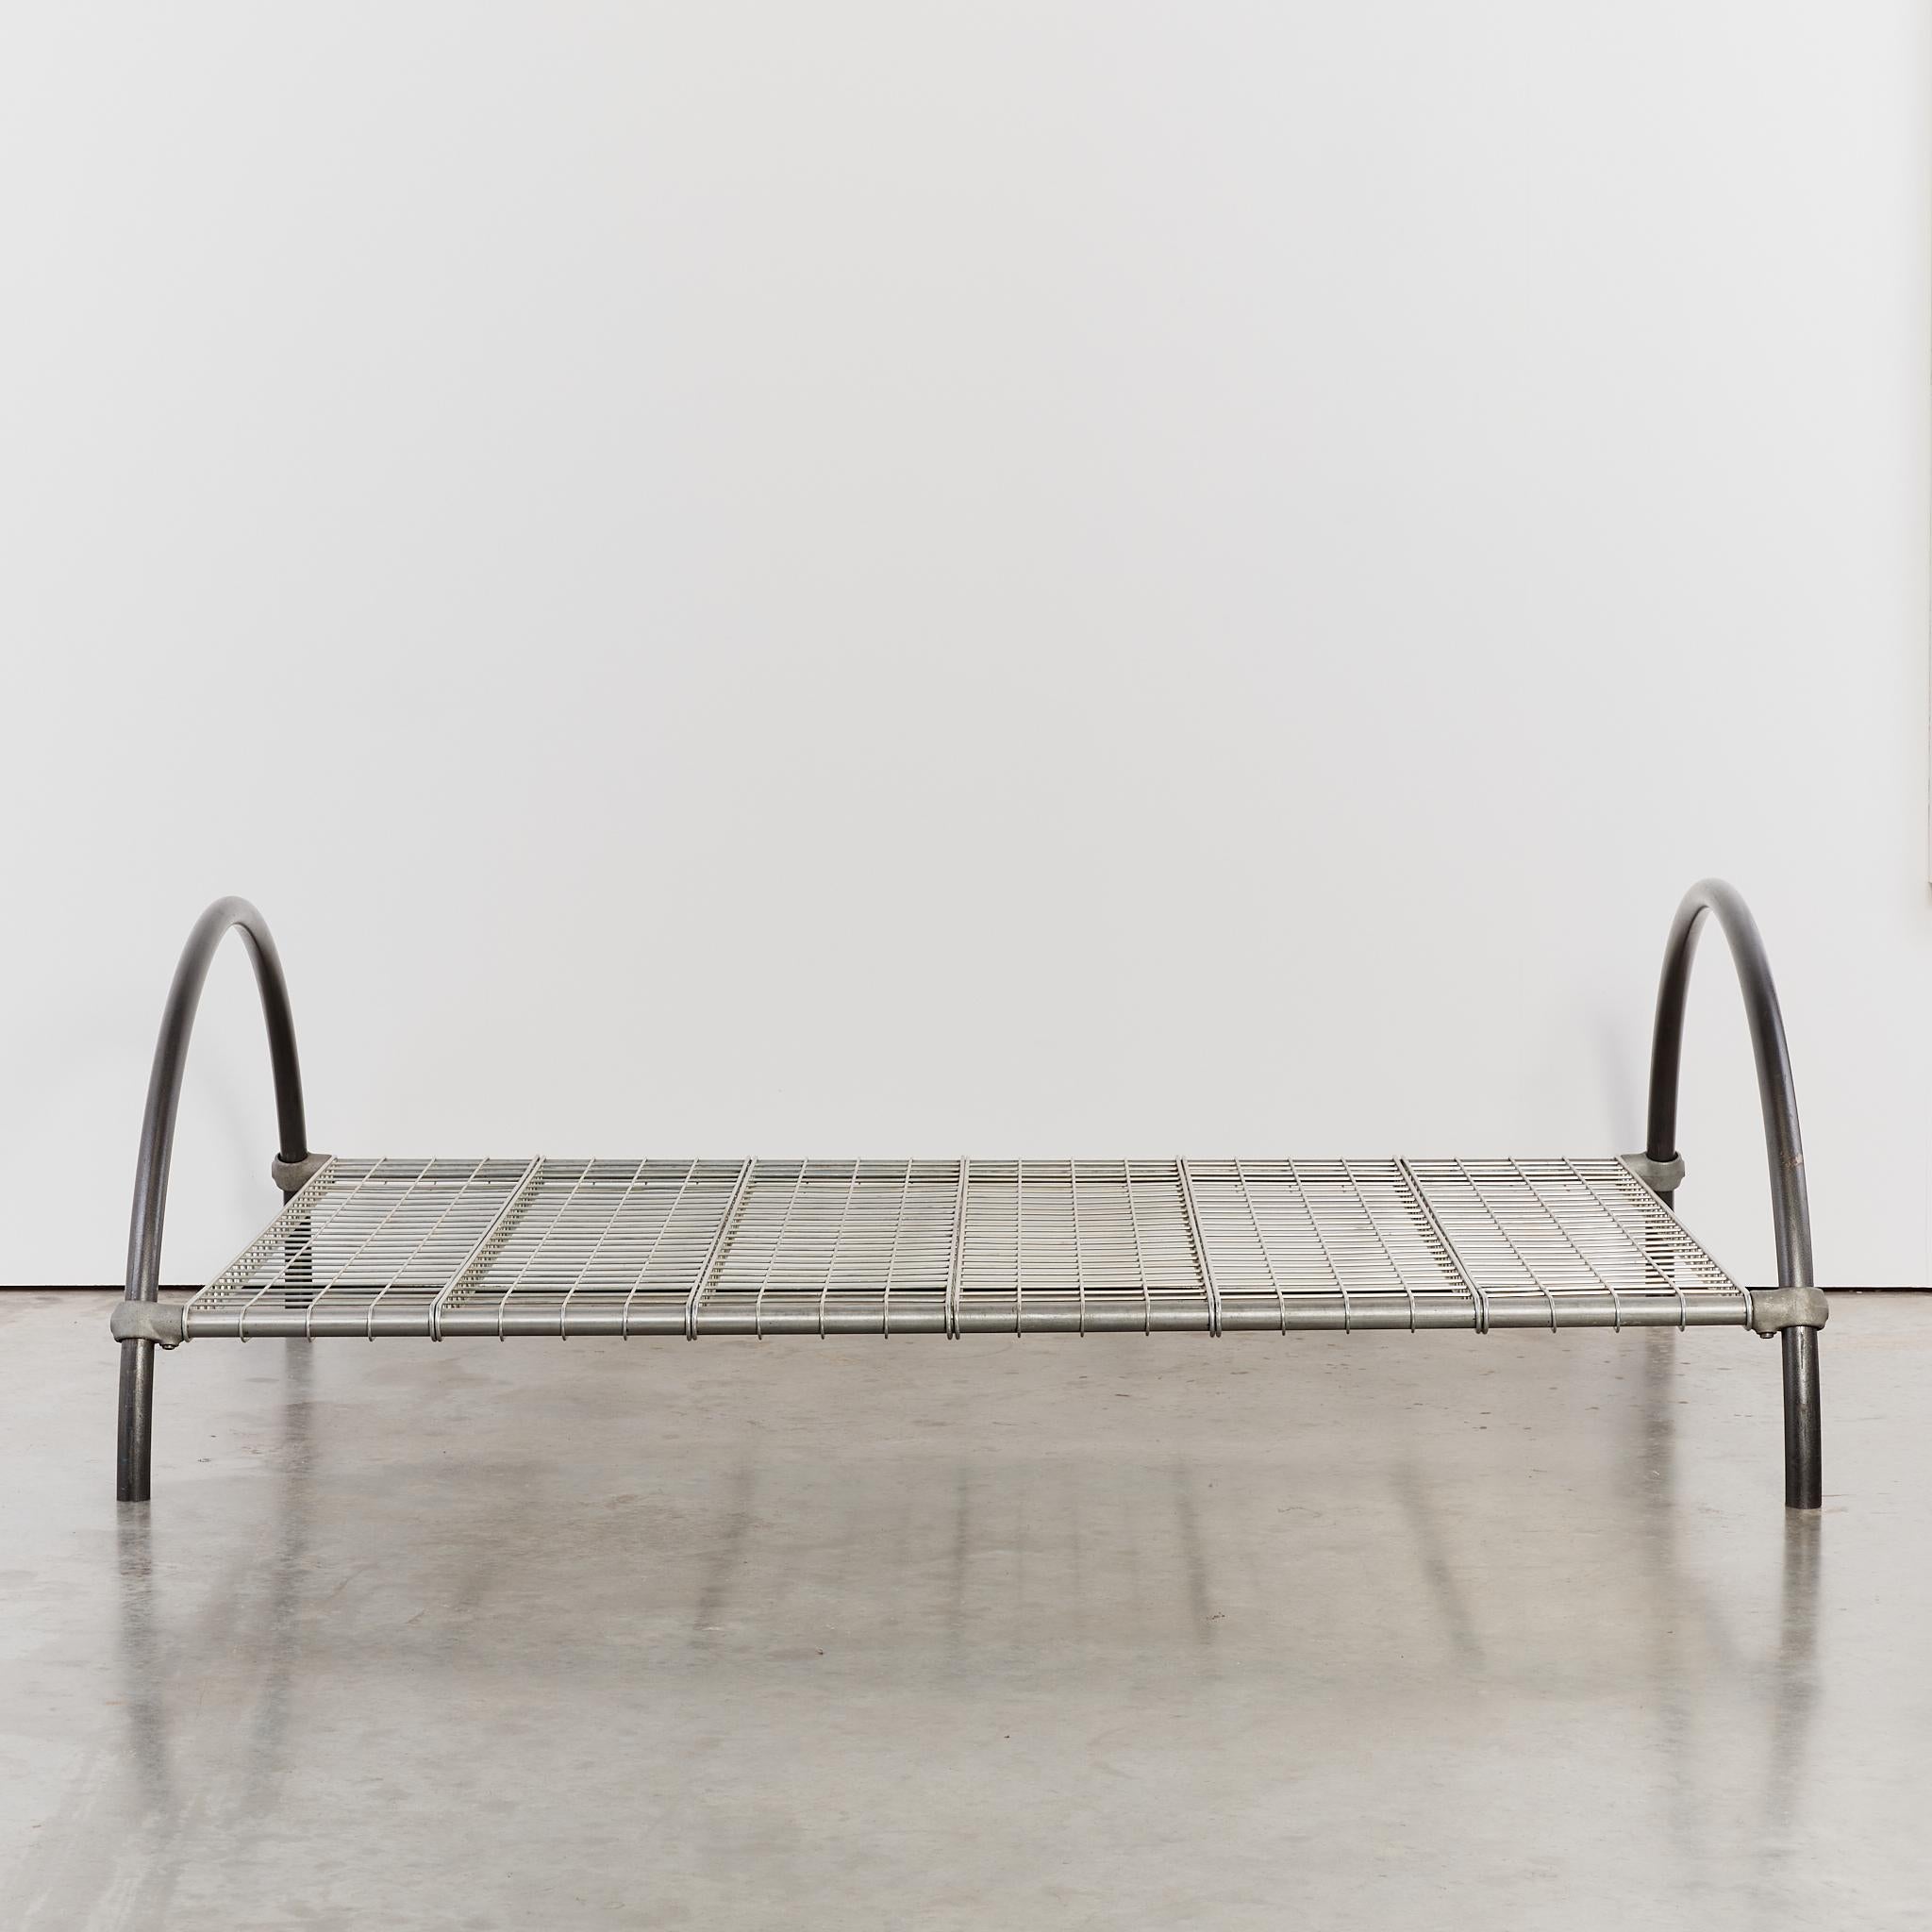 Round Rail bed by designer Ron Arad, with enamelled tubular steel, wire-mesh panels, kee-klamps and six strut horizontal supports.

Ron Arad, RDI is a British-Israeli industrial designer, artist, and architectural designer. Born in Tel Aviv in 1951,